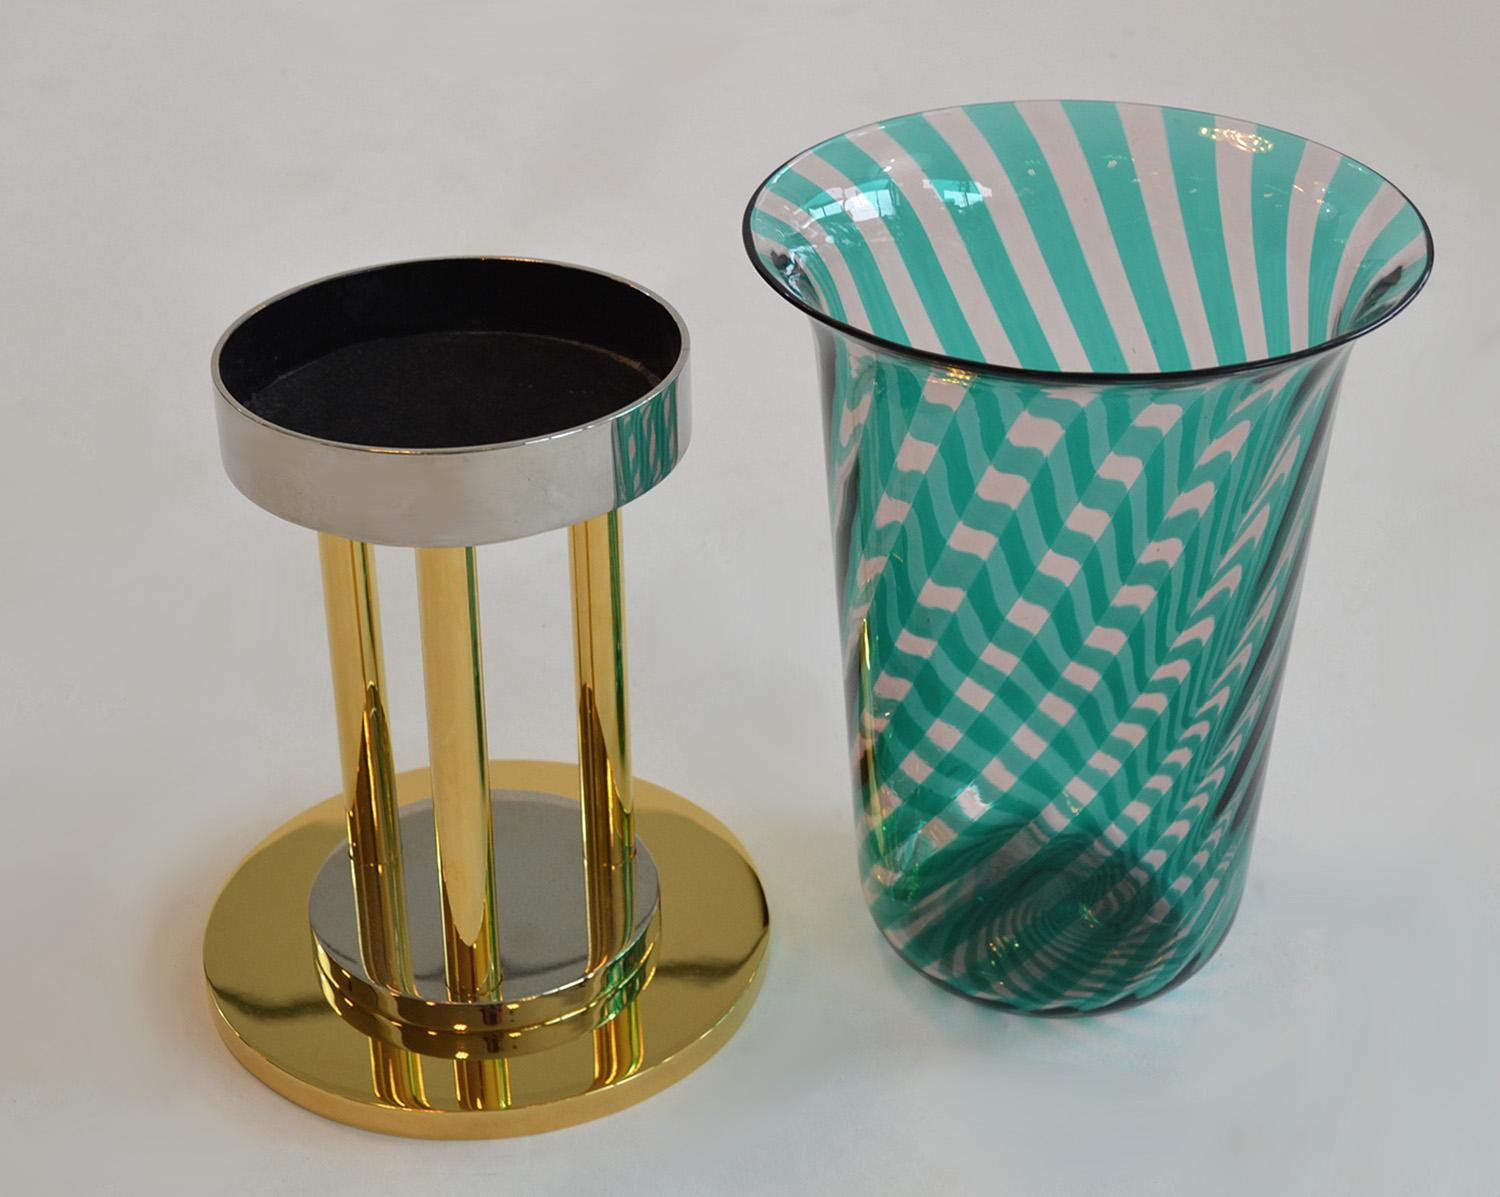 Large Italian Glass Vase or Votive in Gold and Stainless Pedestal by VeArt
Large Italian glass vase gold and stainless pedestal by VeArt. Large green / blue pattern Murano glass vase, sits on a substantial solid brass and polished steel pedestal